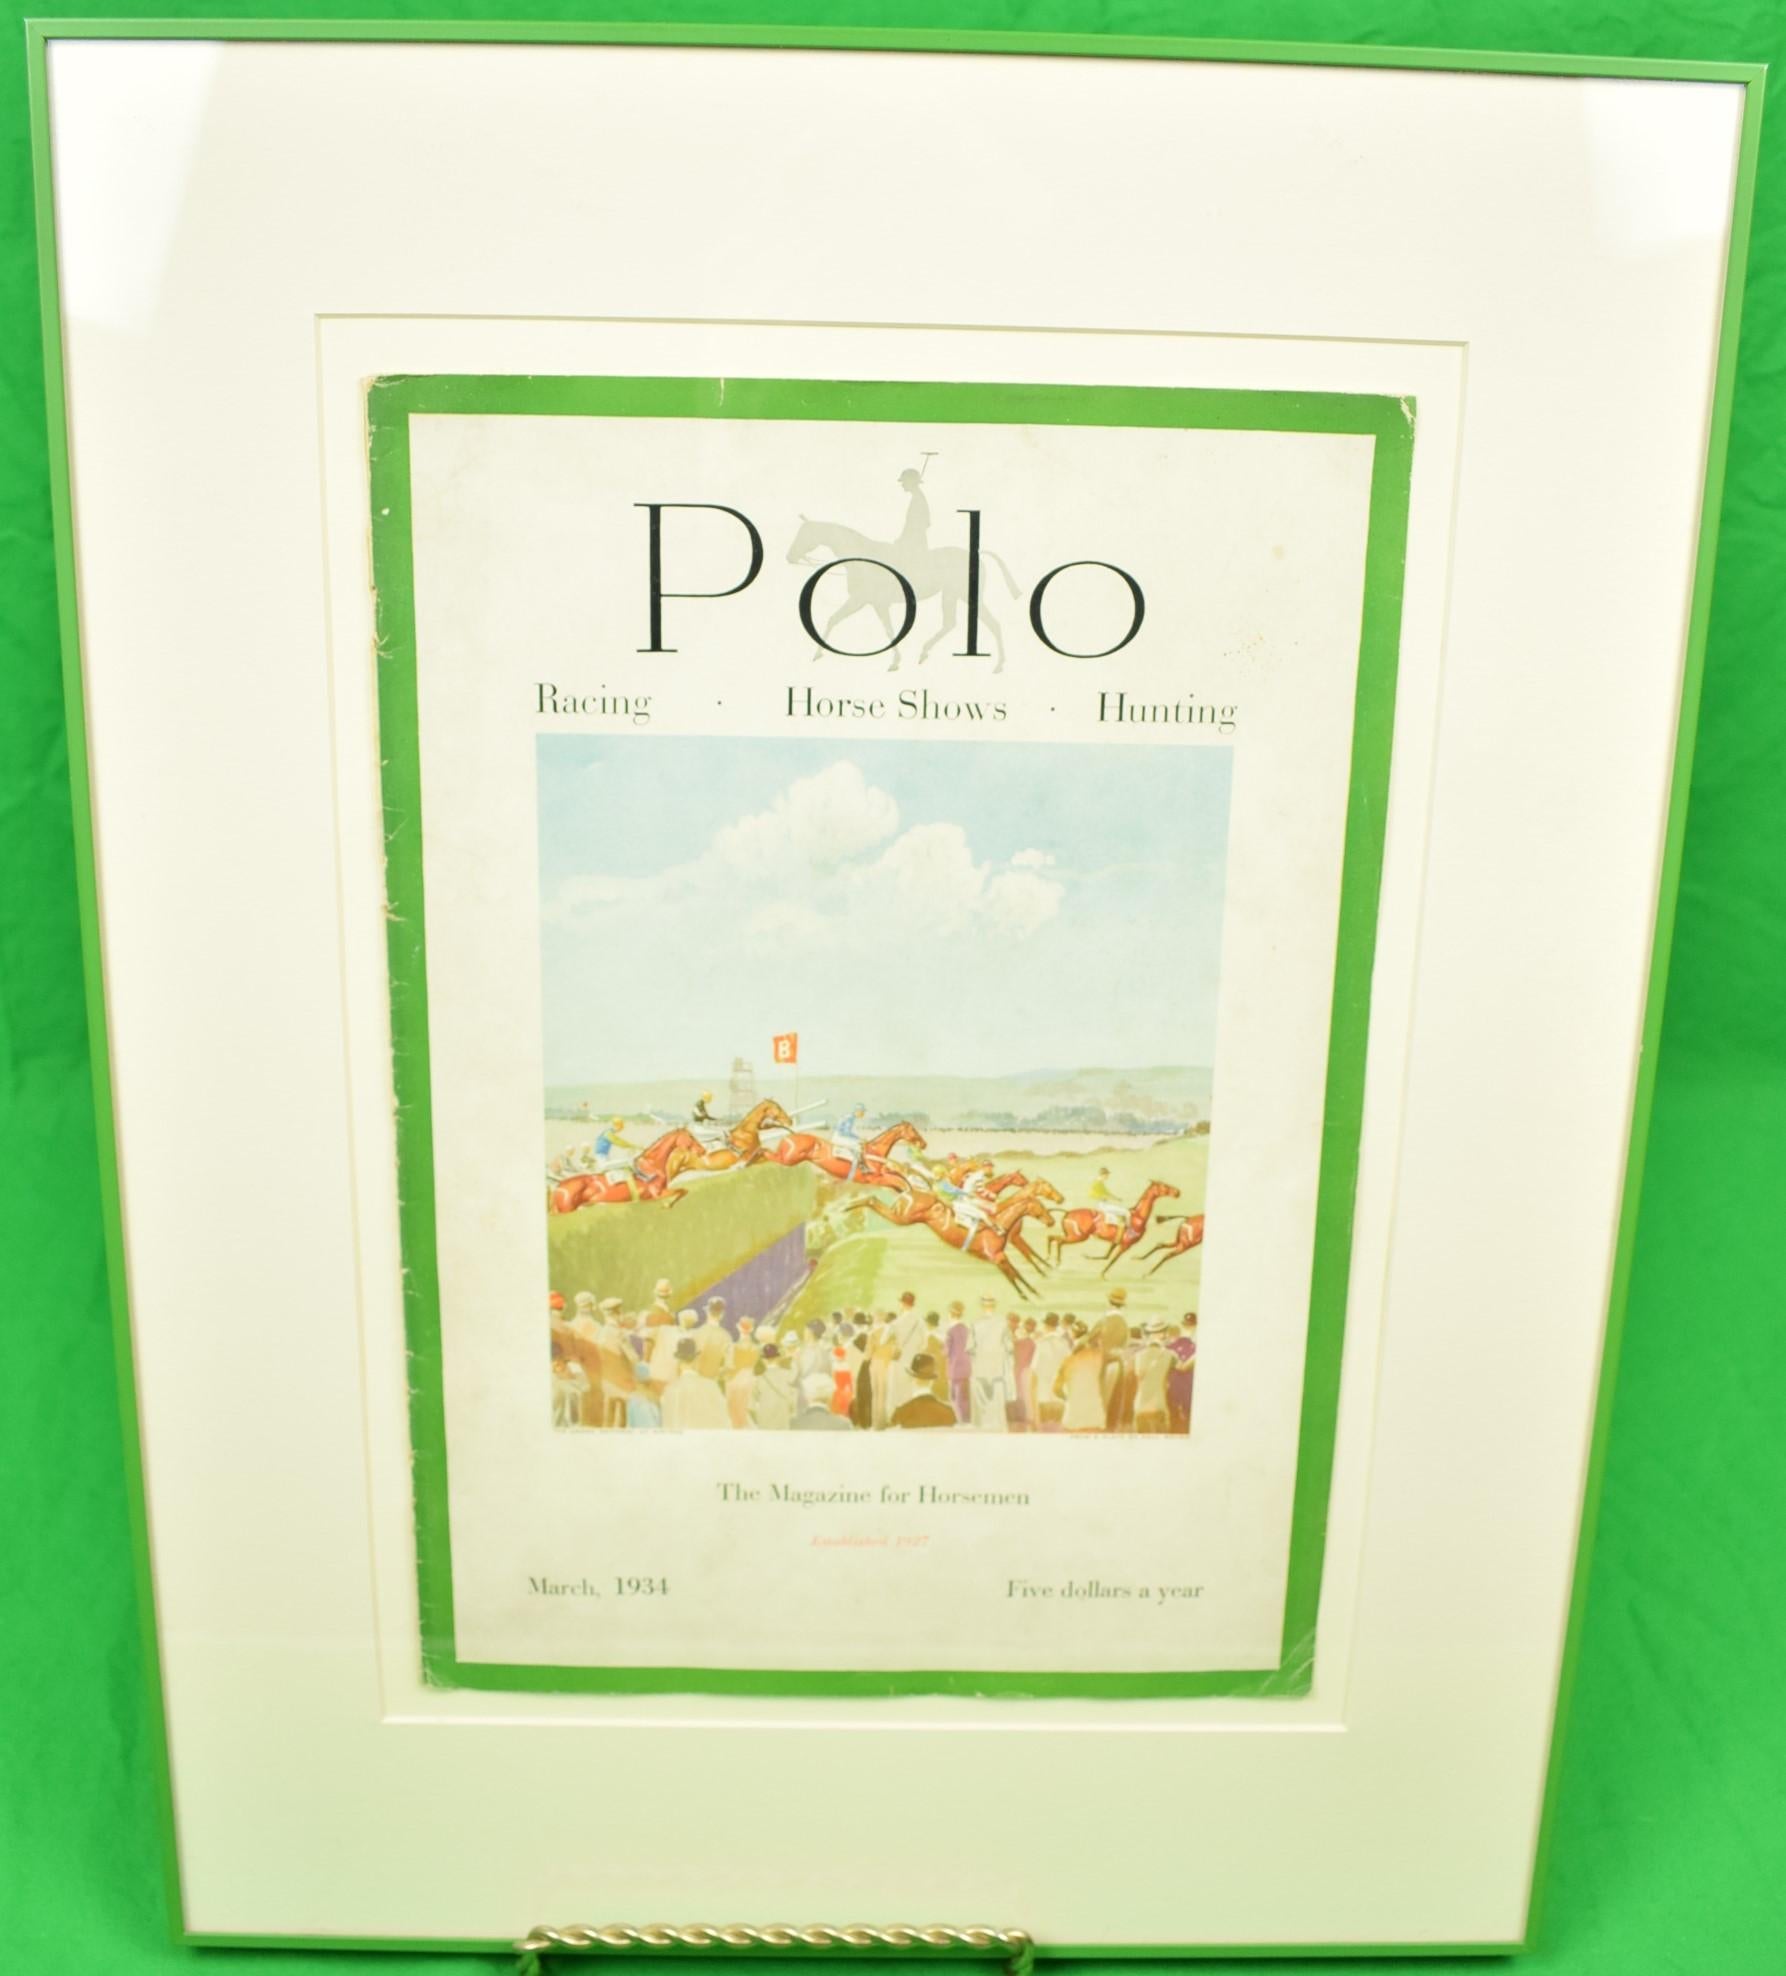 "Polo Magazine Cover March, 1934 w/ the Grand National at Aintree" by Paul Brown - Print by Unknown